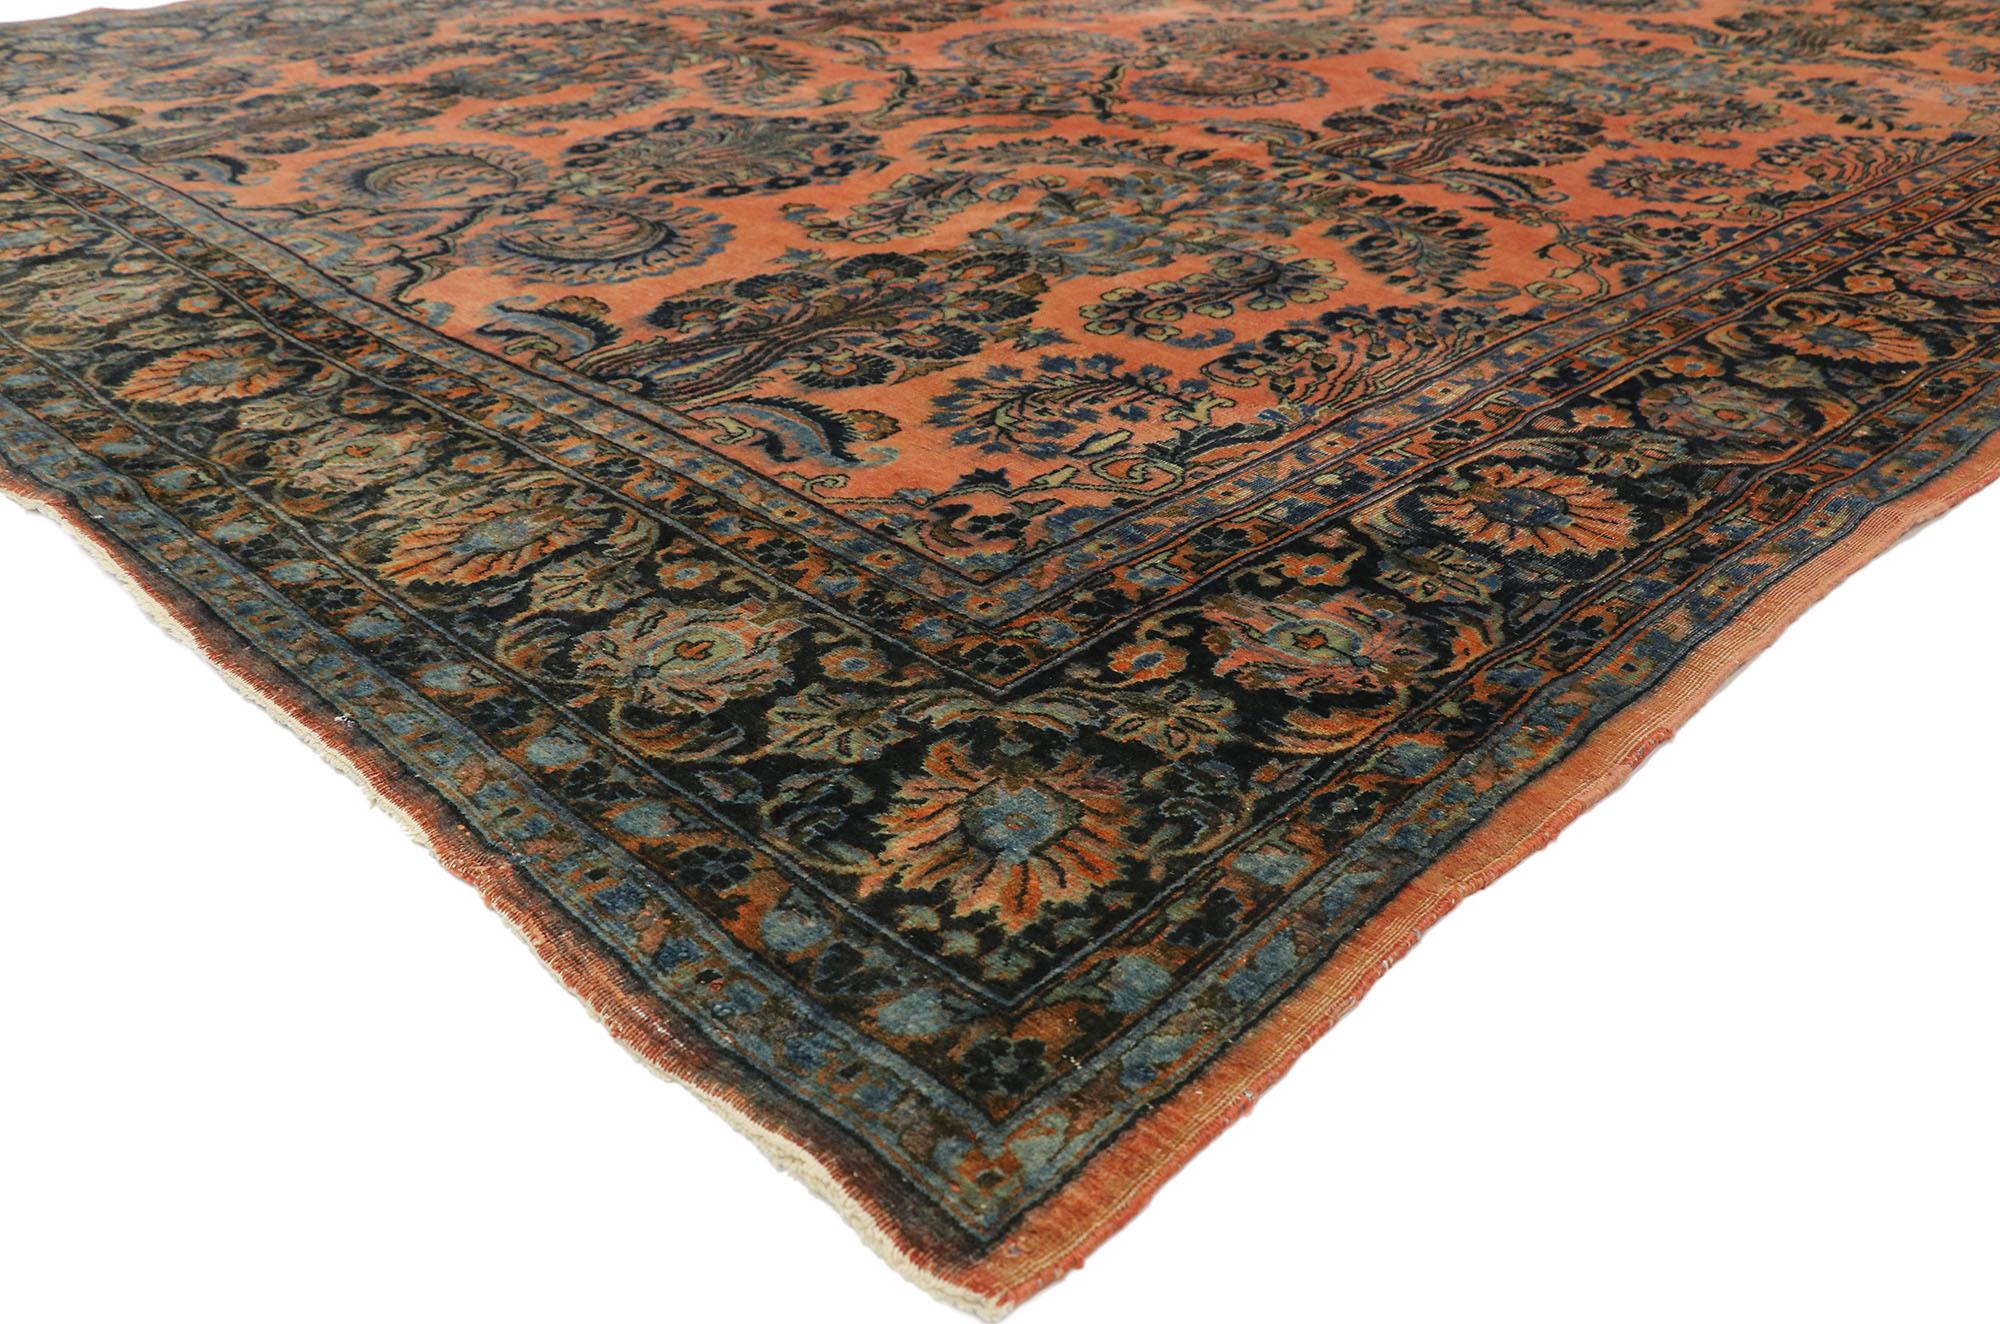 71540 Rustic Antique Persian Kashan Rug, 08'05 x 11'05. 
Rustic charm meets Victorian elegance in this hand knotted wool antique Persian Kashan rug. The architectural design elements and rich colors woven into this piece work together creating an